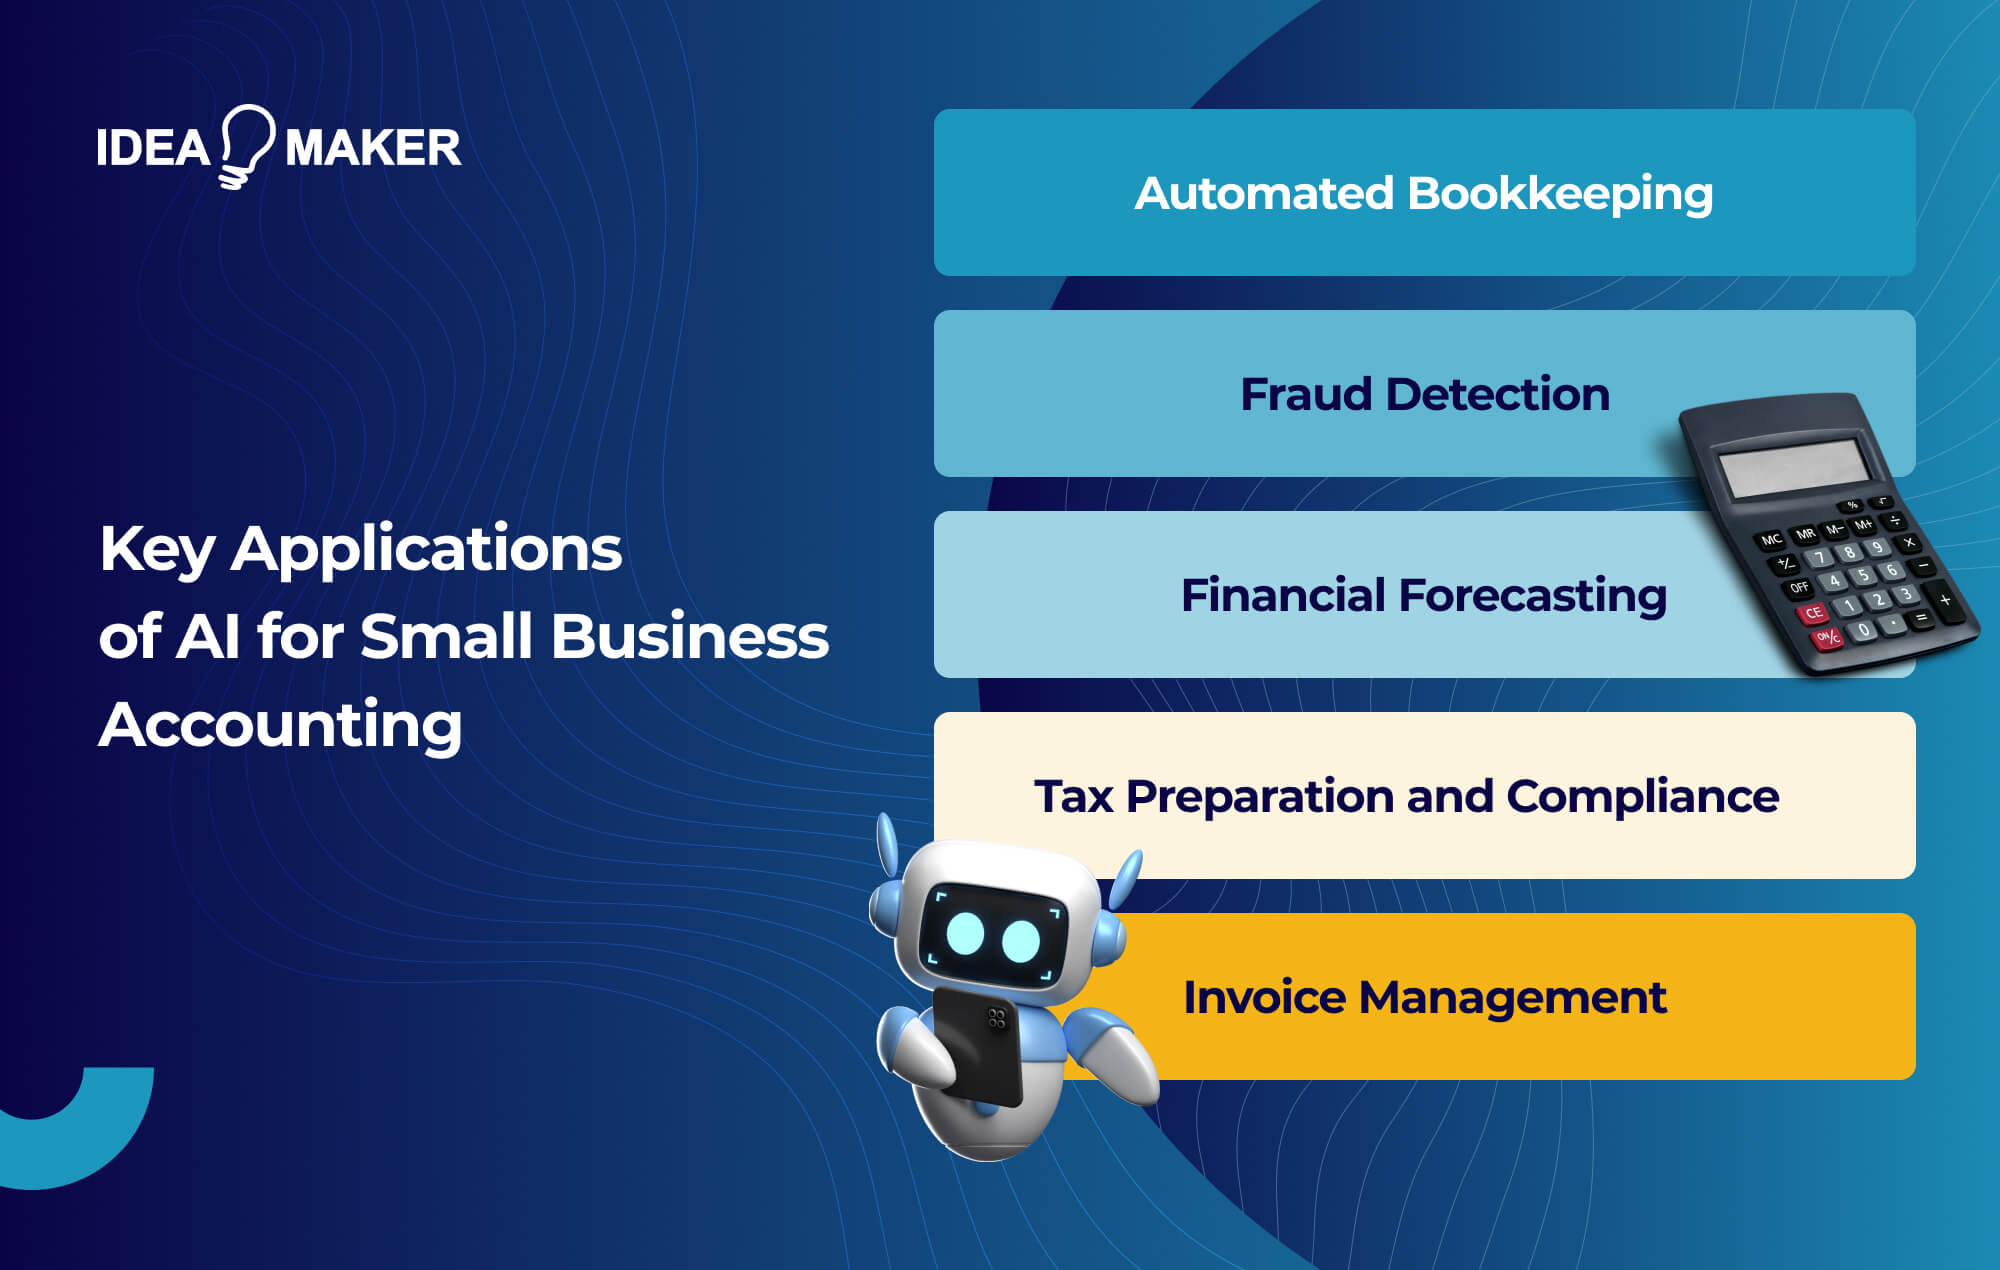 Ideamaker - Key Applications of AI for Small Business Accounting